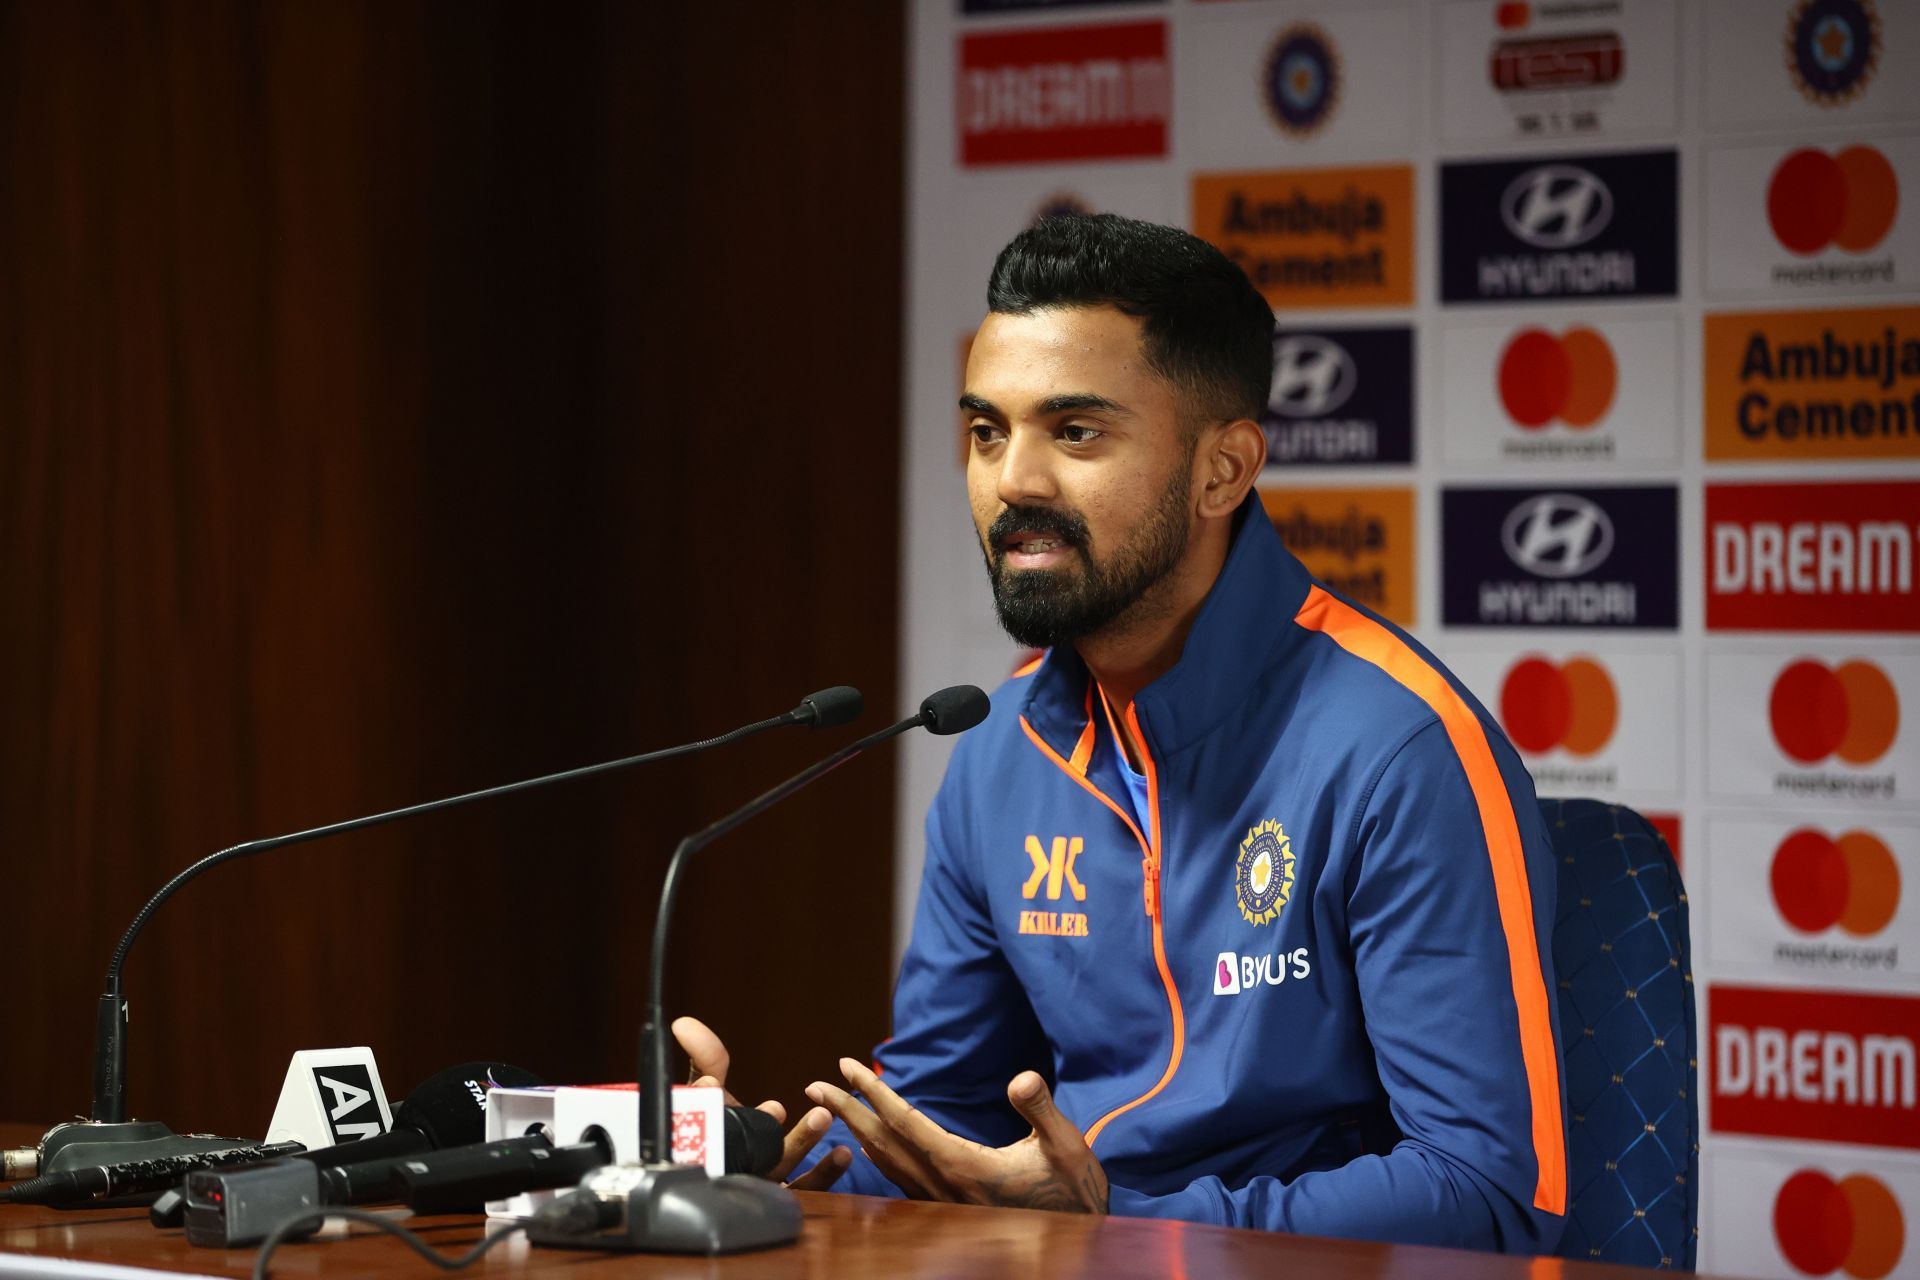 KL Rahul at the India Training Session (Image: Getty)